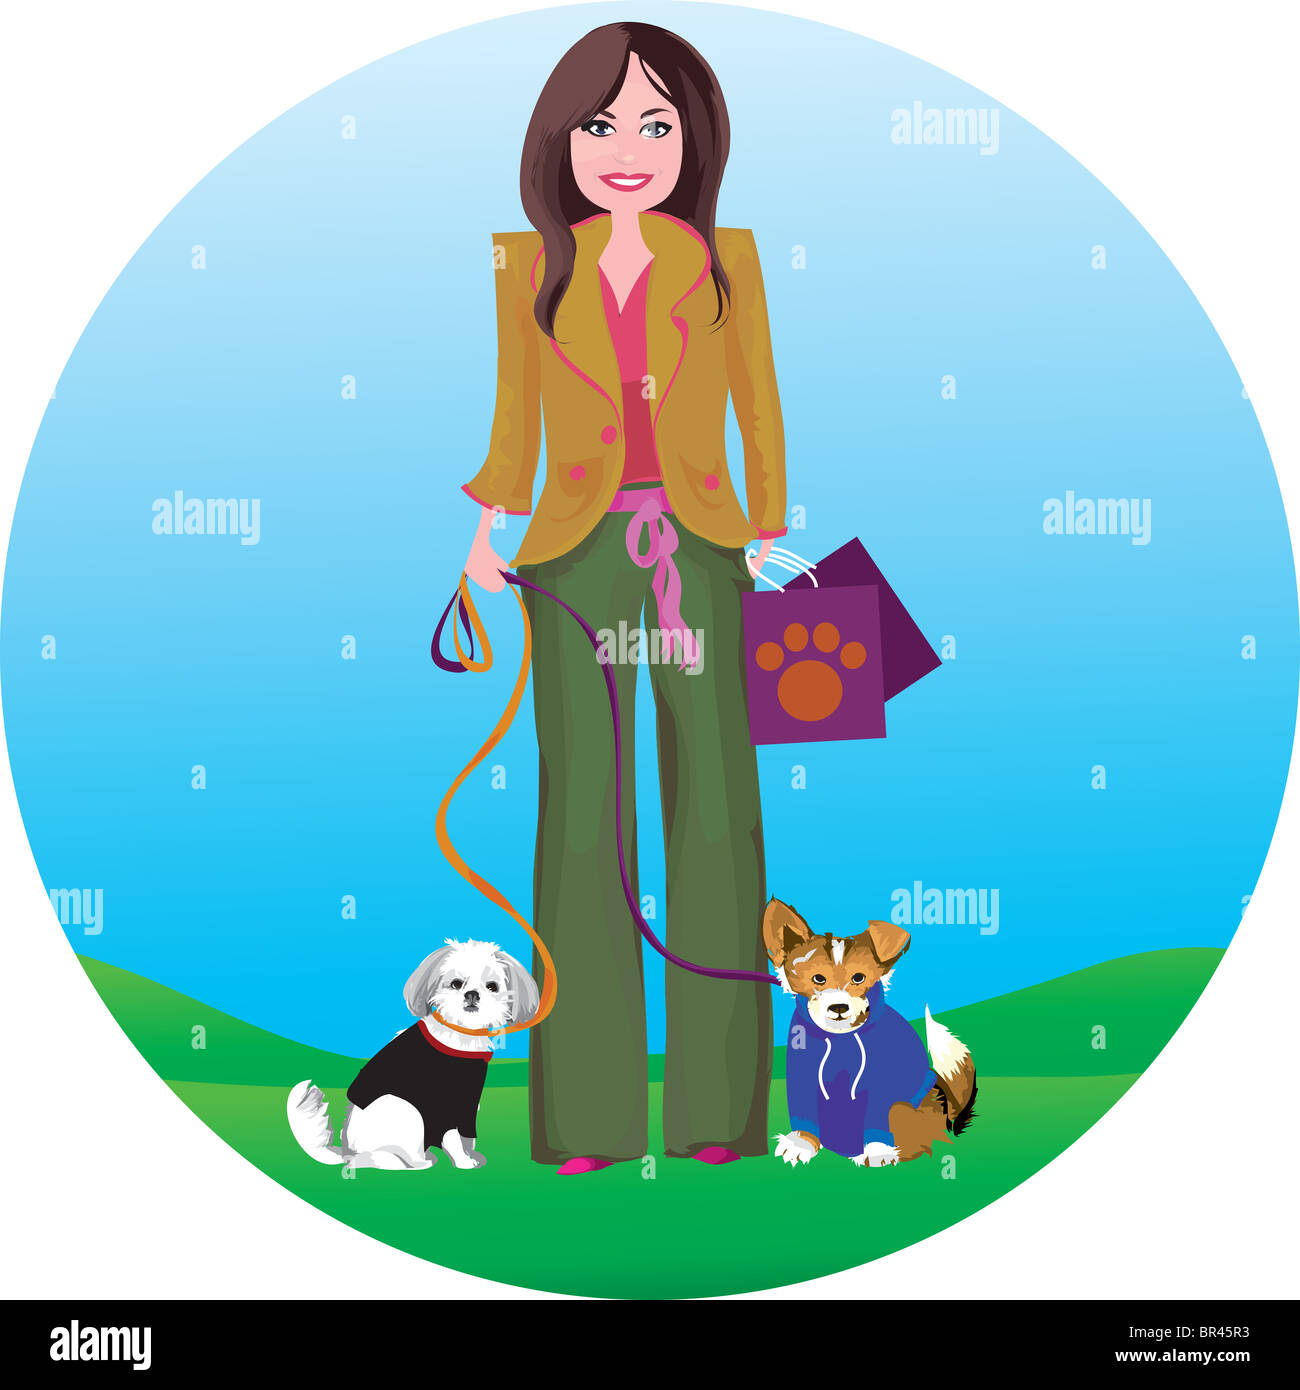 a-woman-walking-two-dogs-while-shopping-BR45R3.jpg